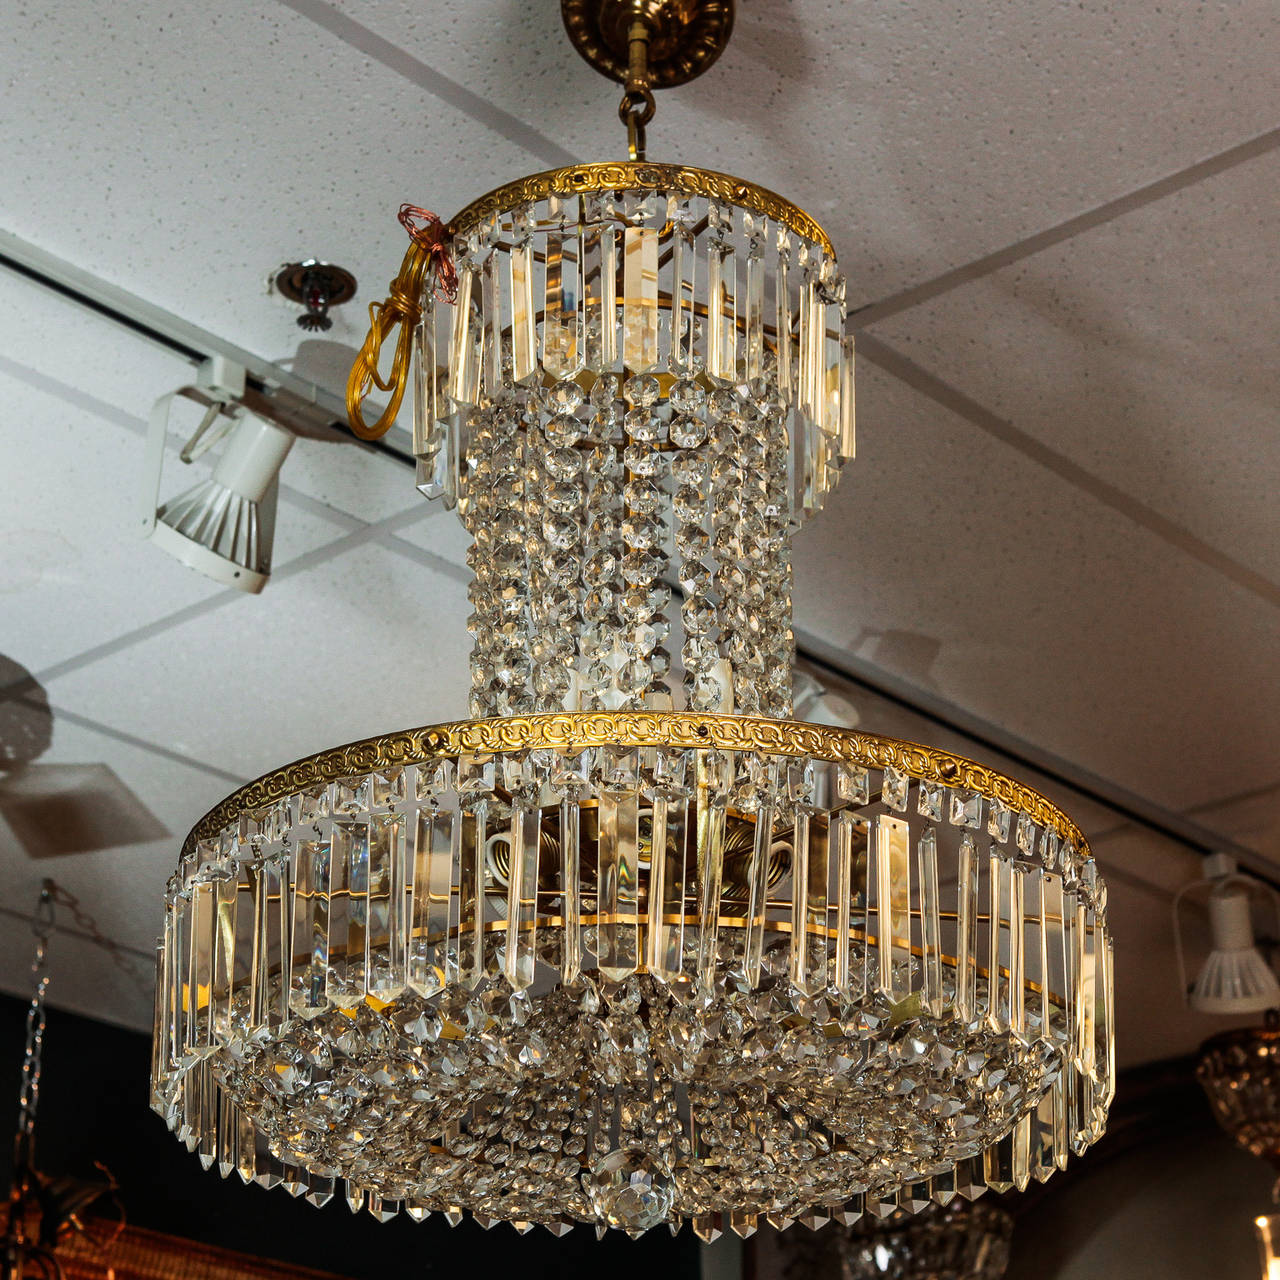 Tall all crystal Swedish chandelier with decorative brass frame and rectangular crystal pendants with a center drop and tall center of draped crystal beading topped with another decorative brass frame and more crystal pendants, circa 1890s. New